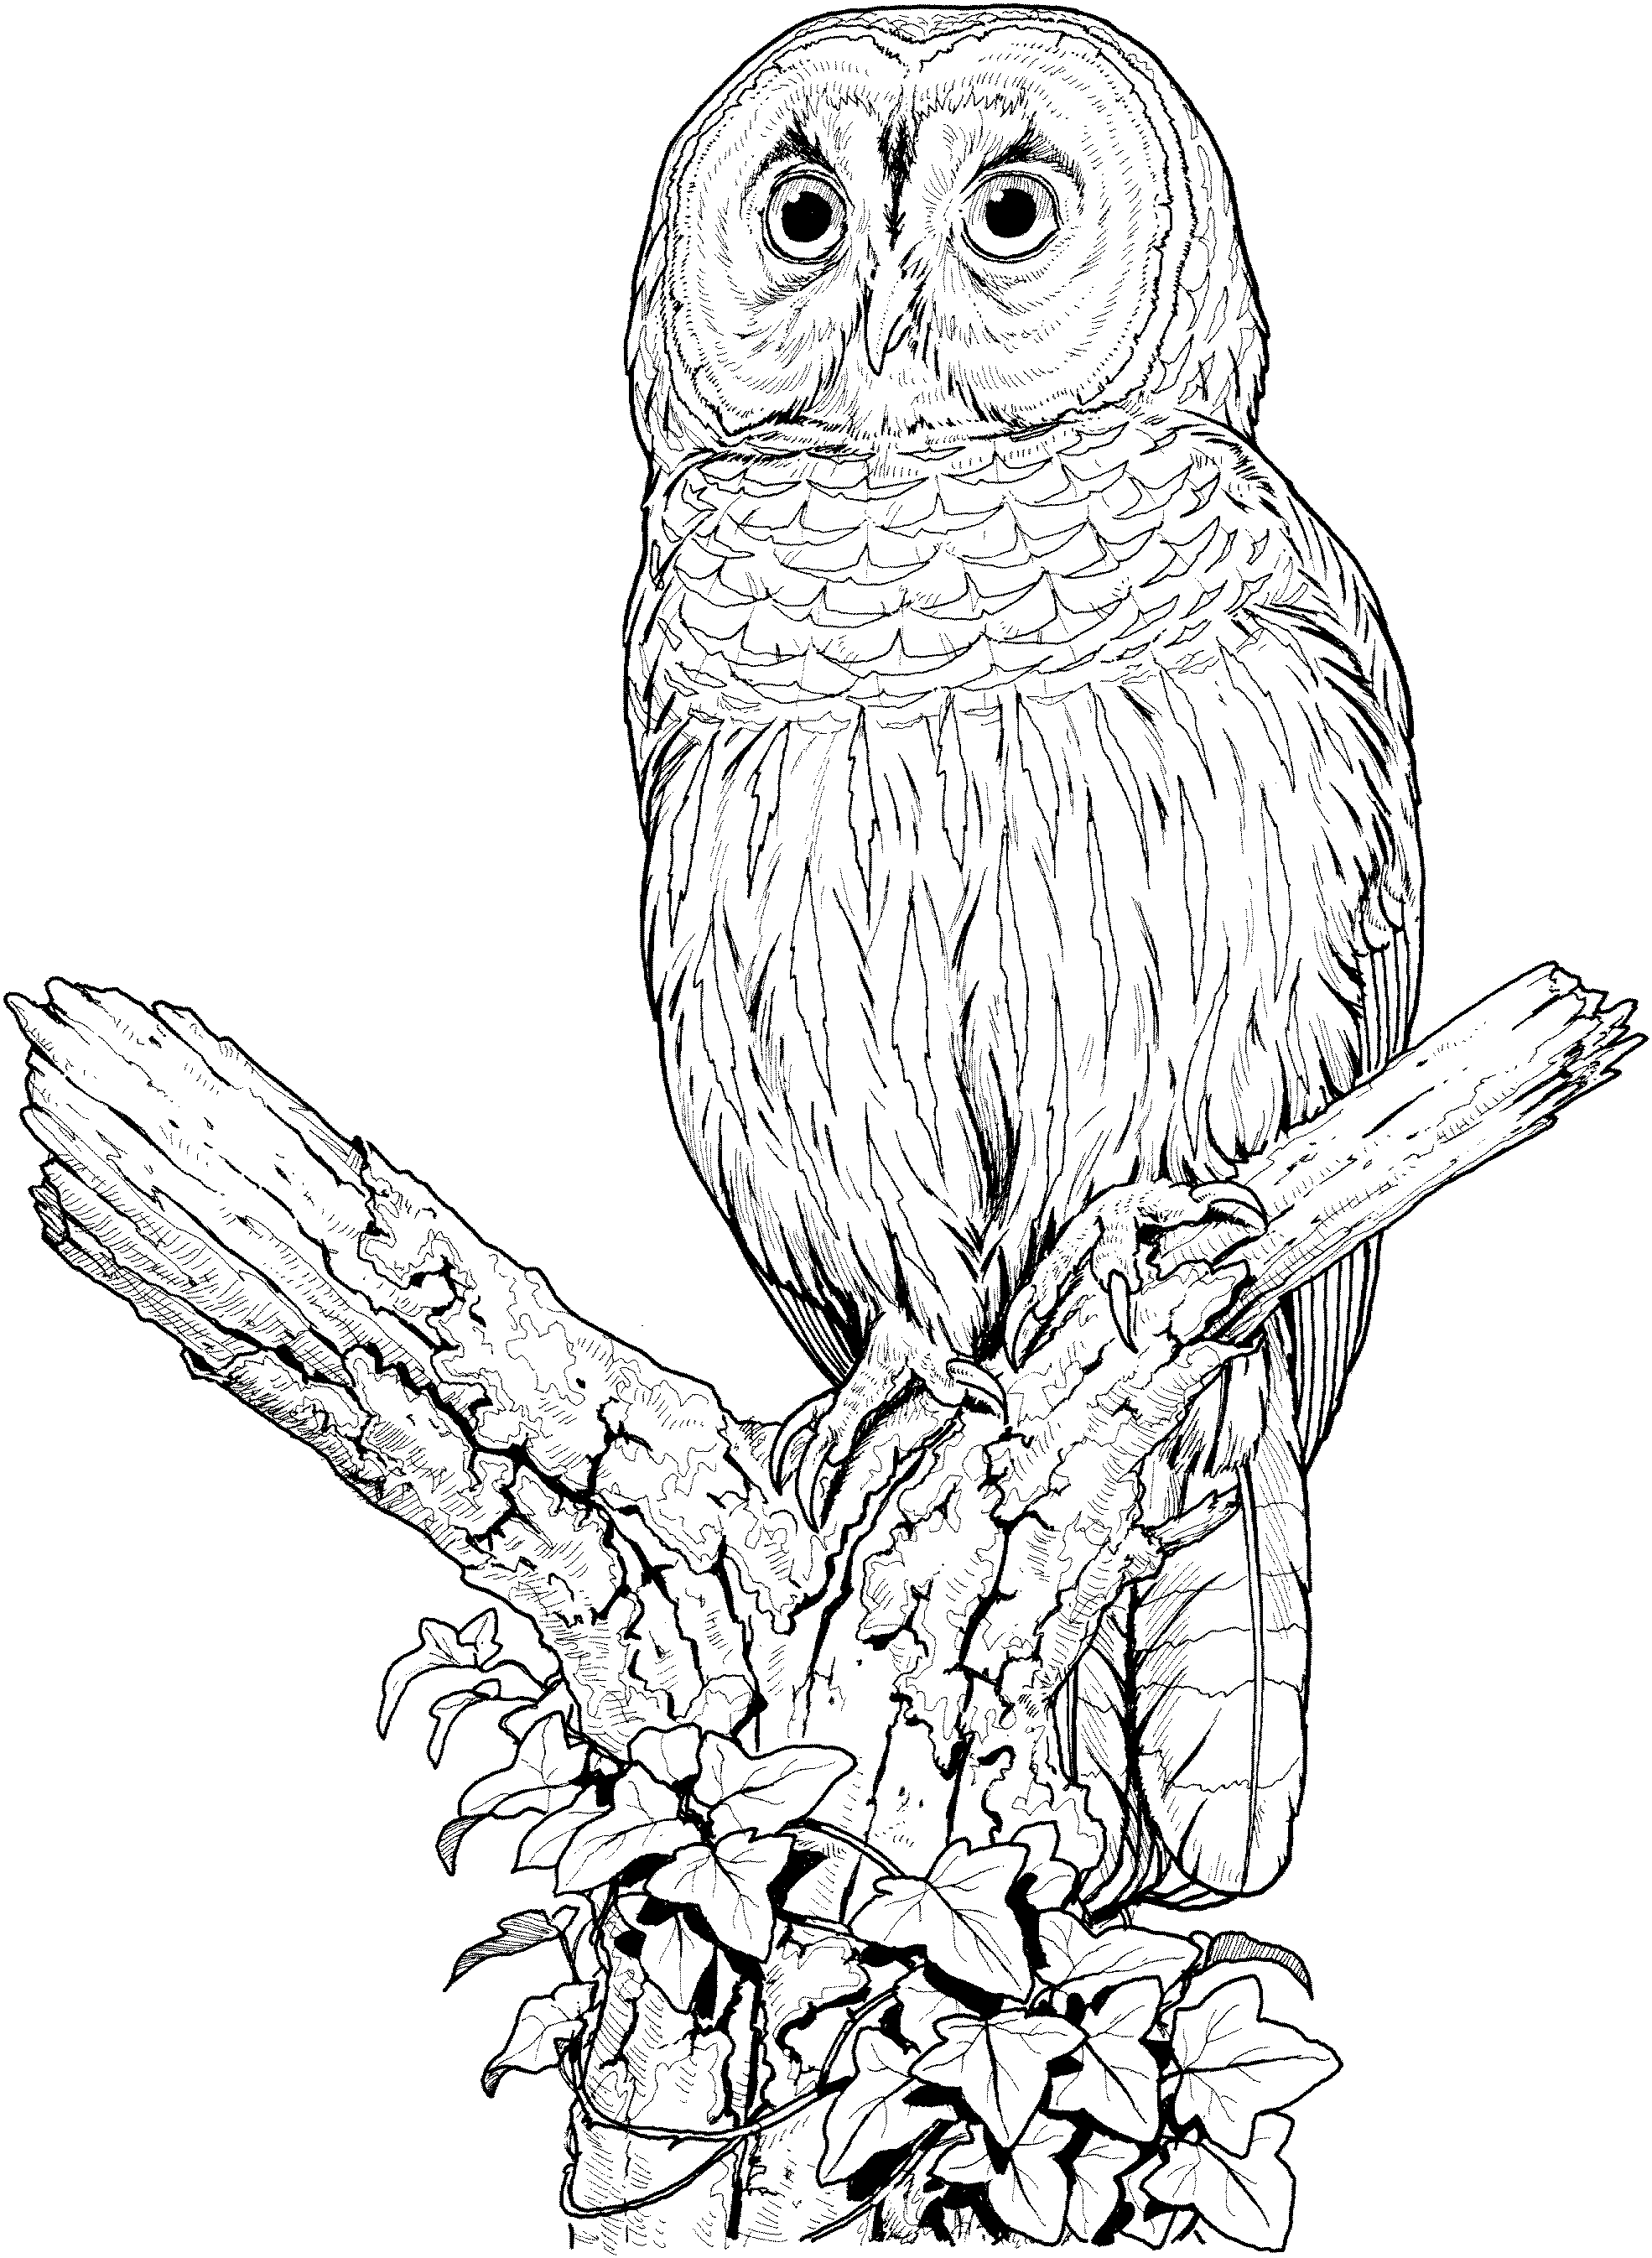 coloring pages owl owl coloring pages all about owl owl coloring pages 